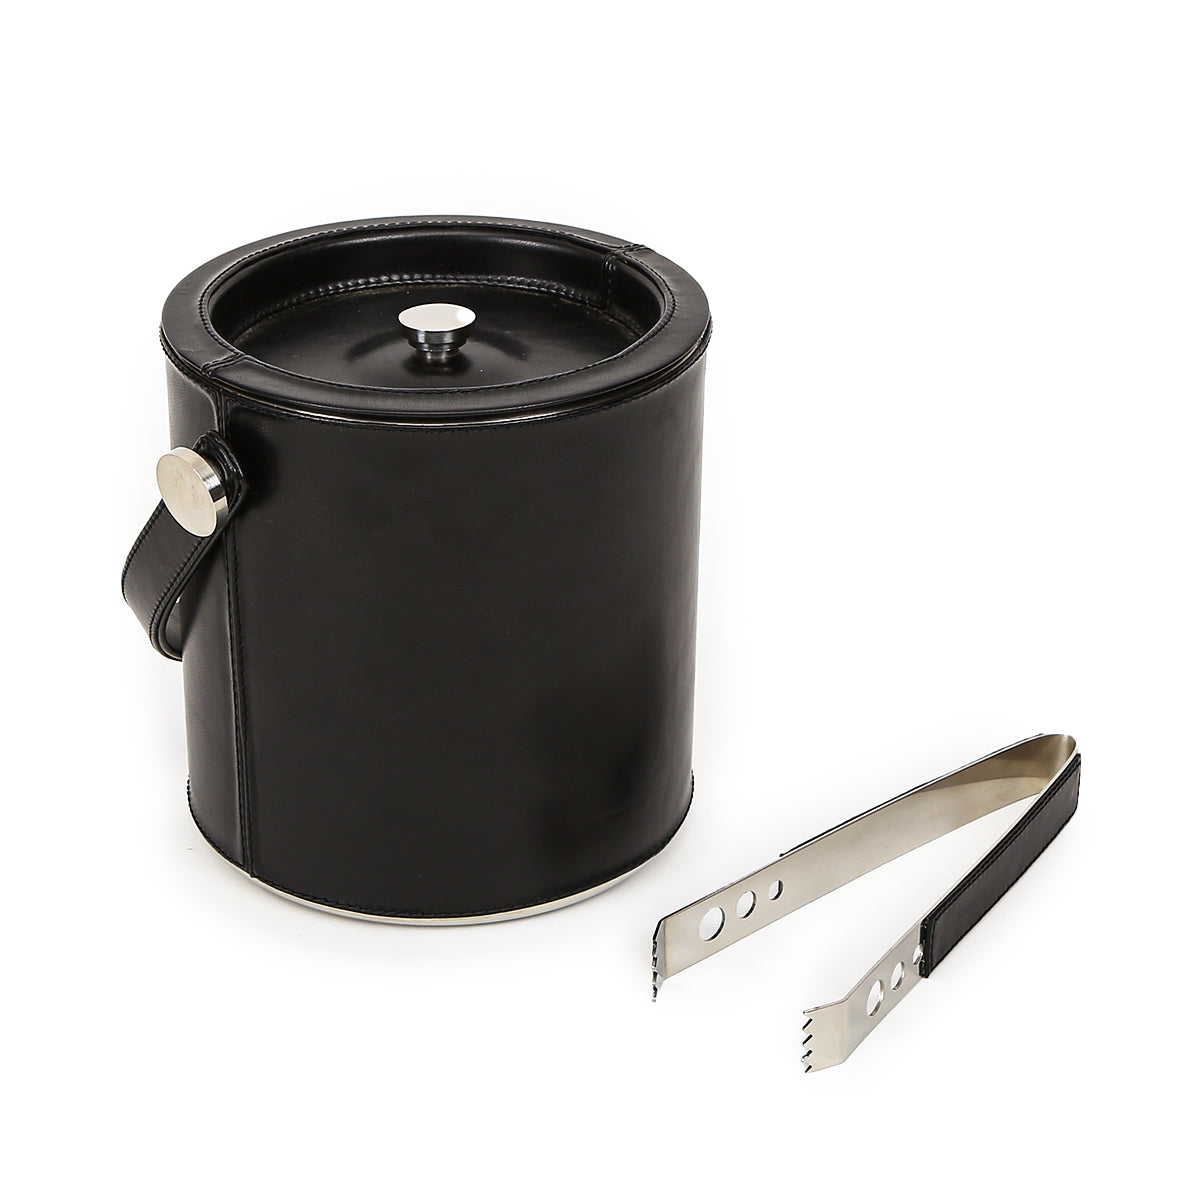 Black Leather Sheath Ice Bucket With Tong